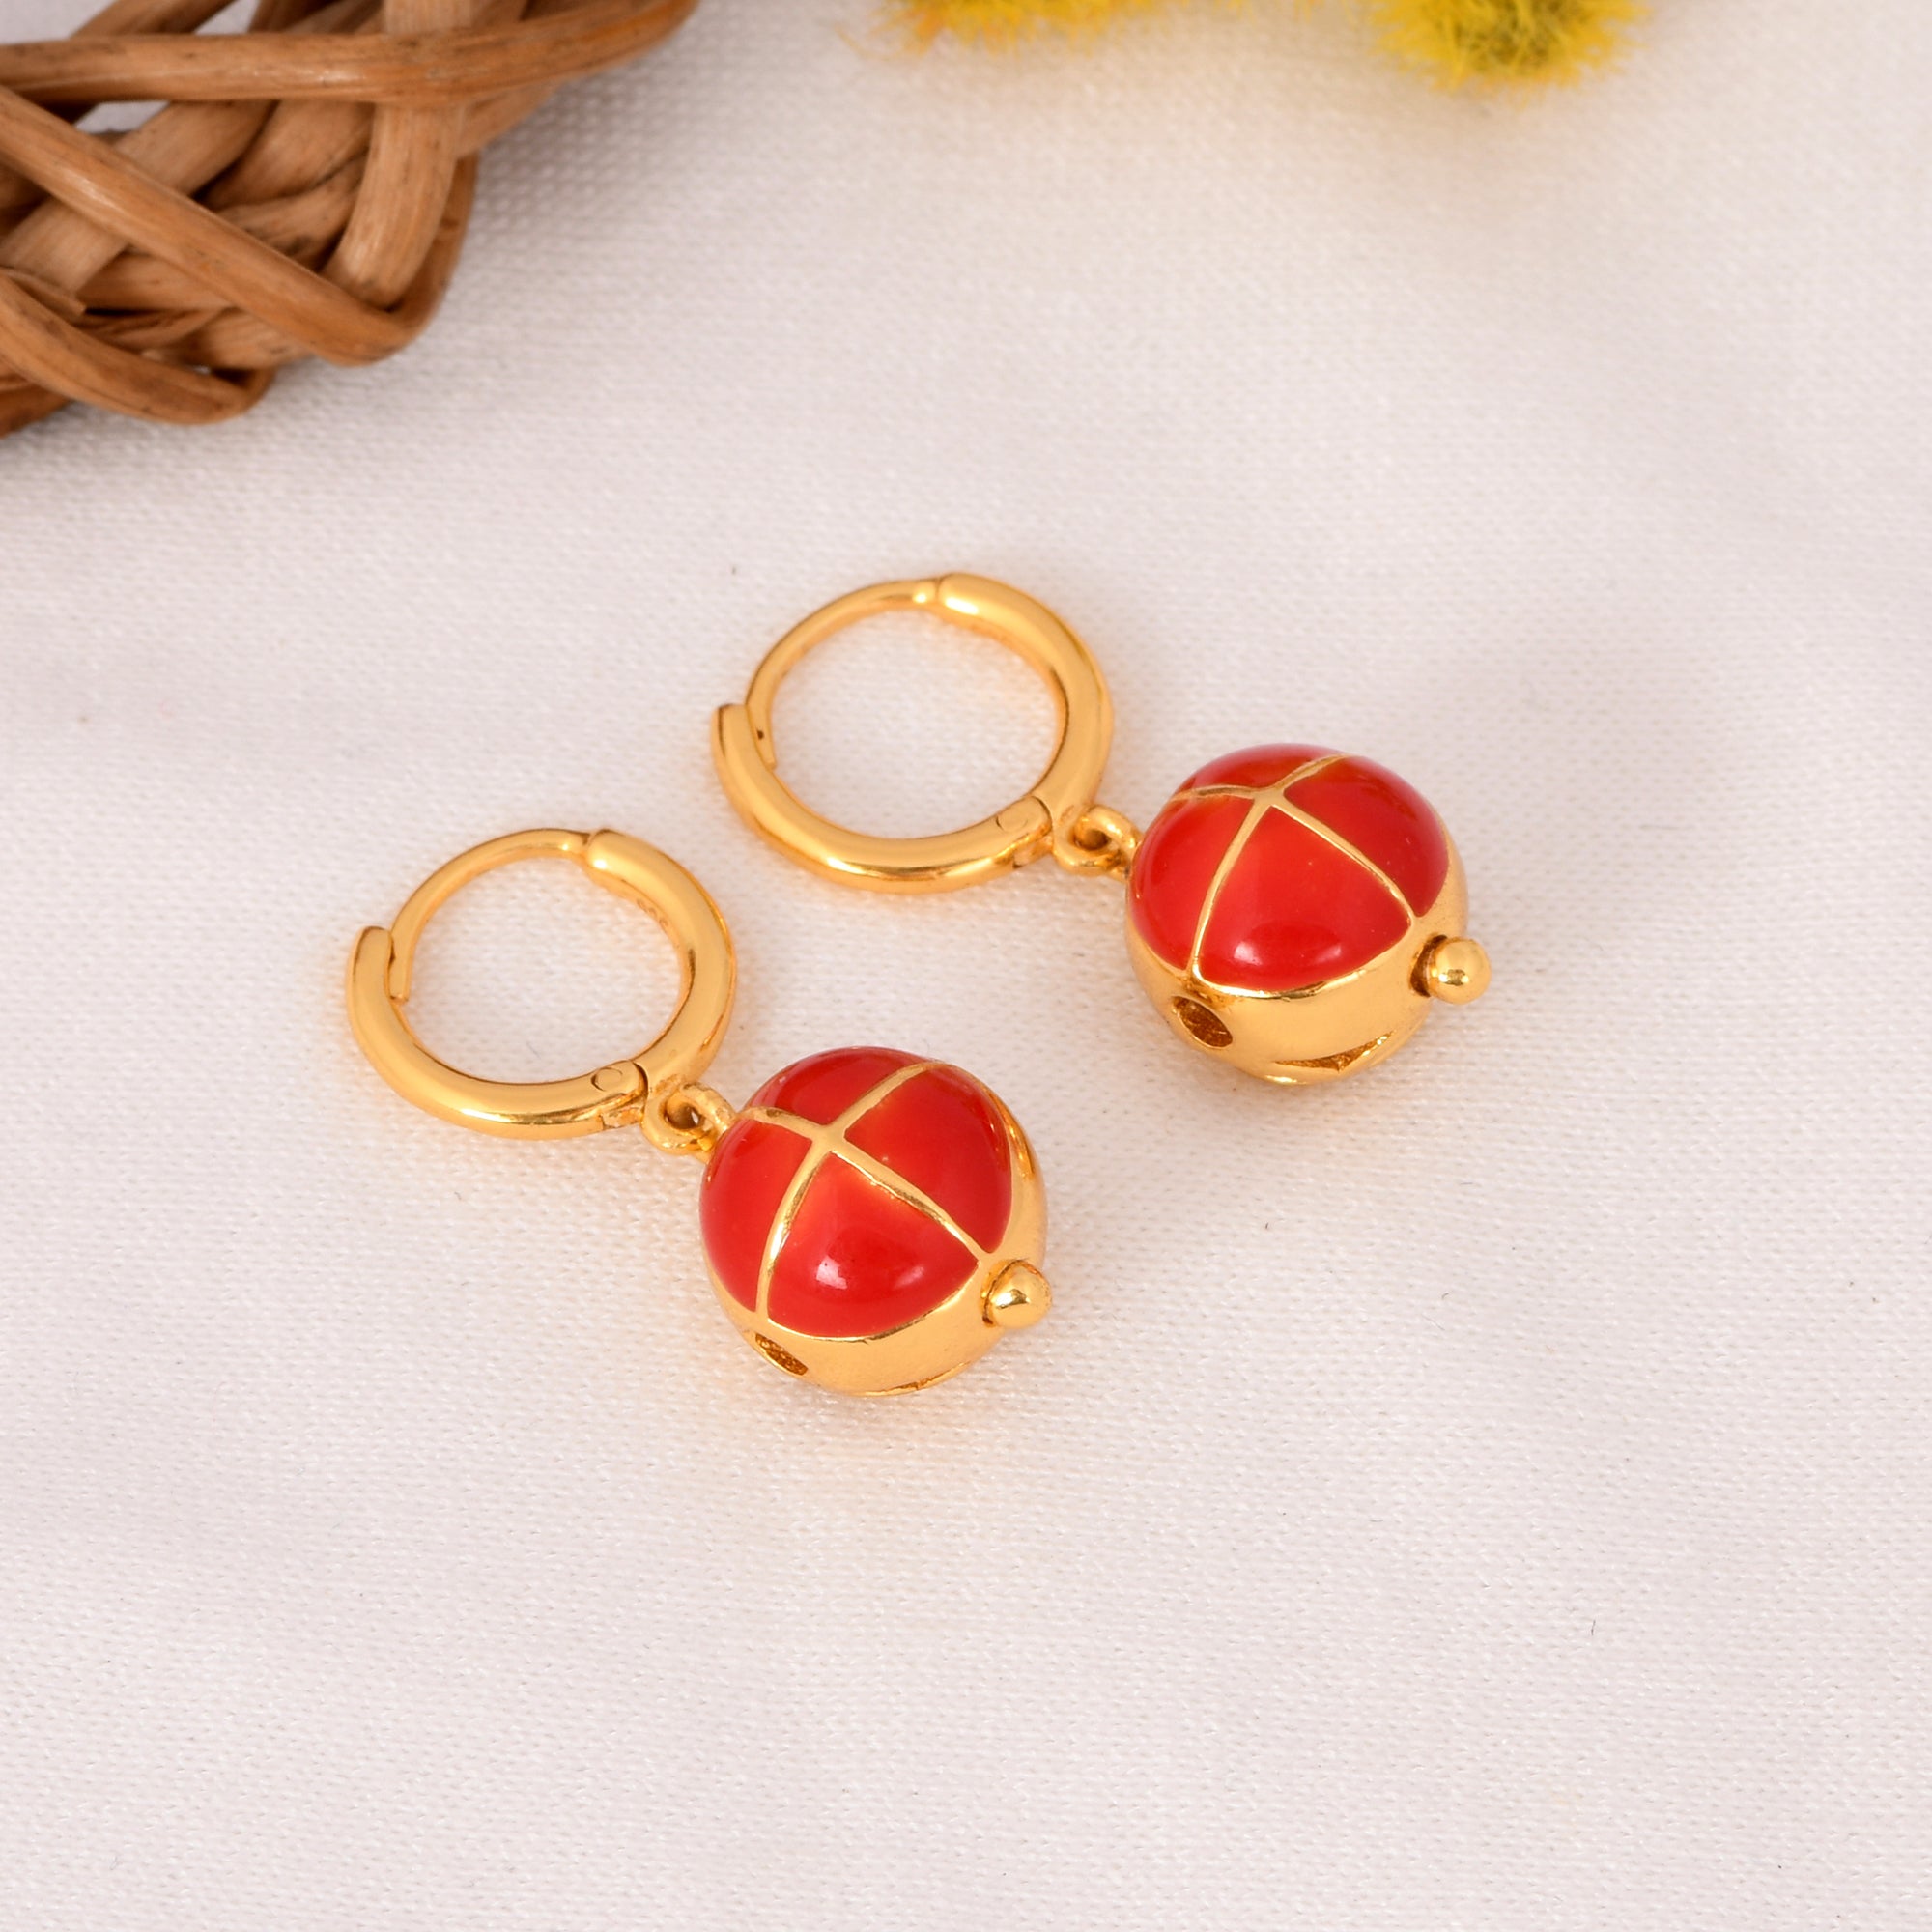 Basic Chakra Earrings with Red Enamelling (Silver with Gold Plating)